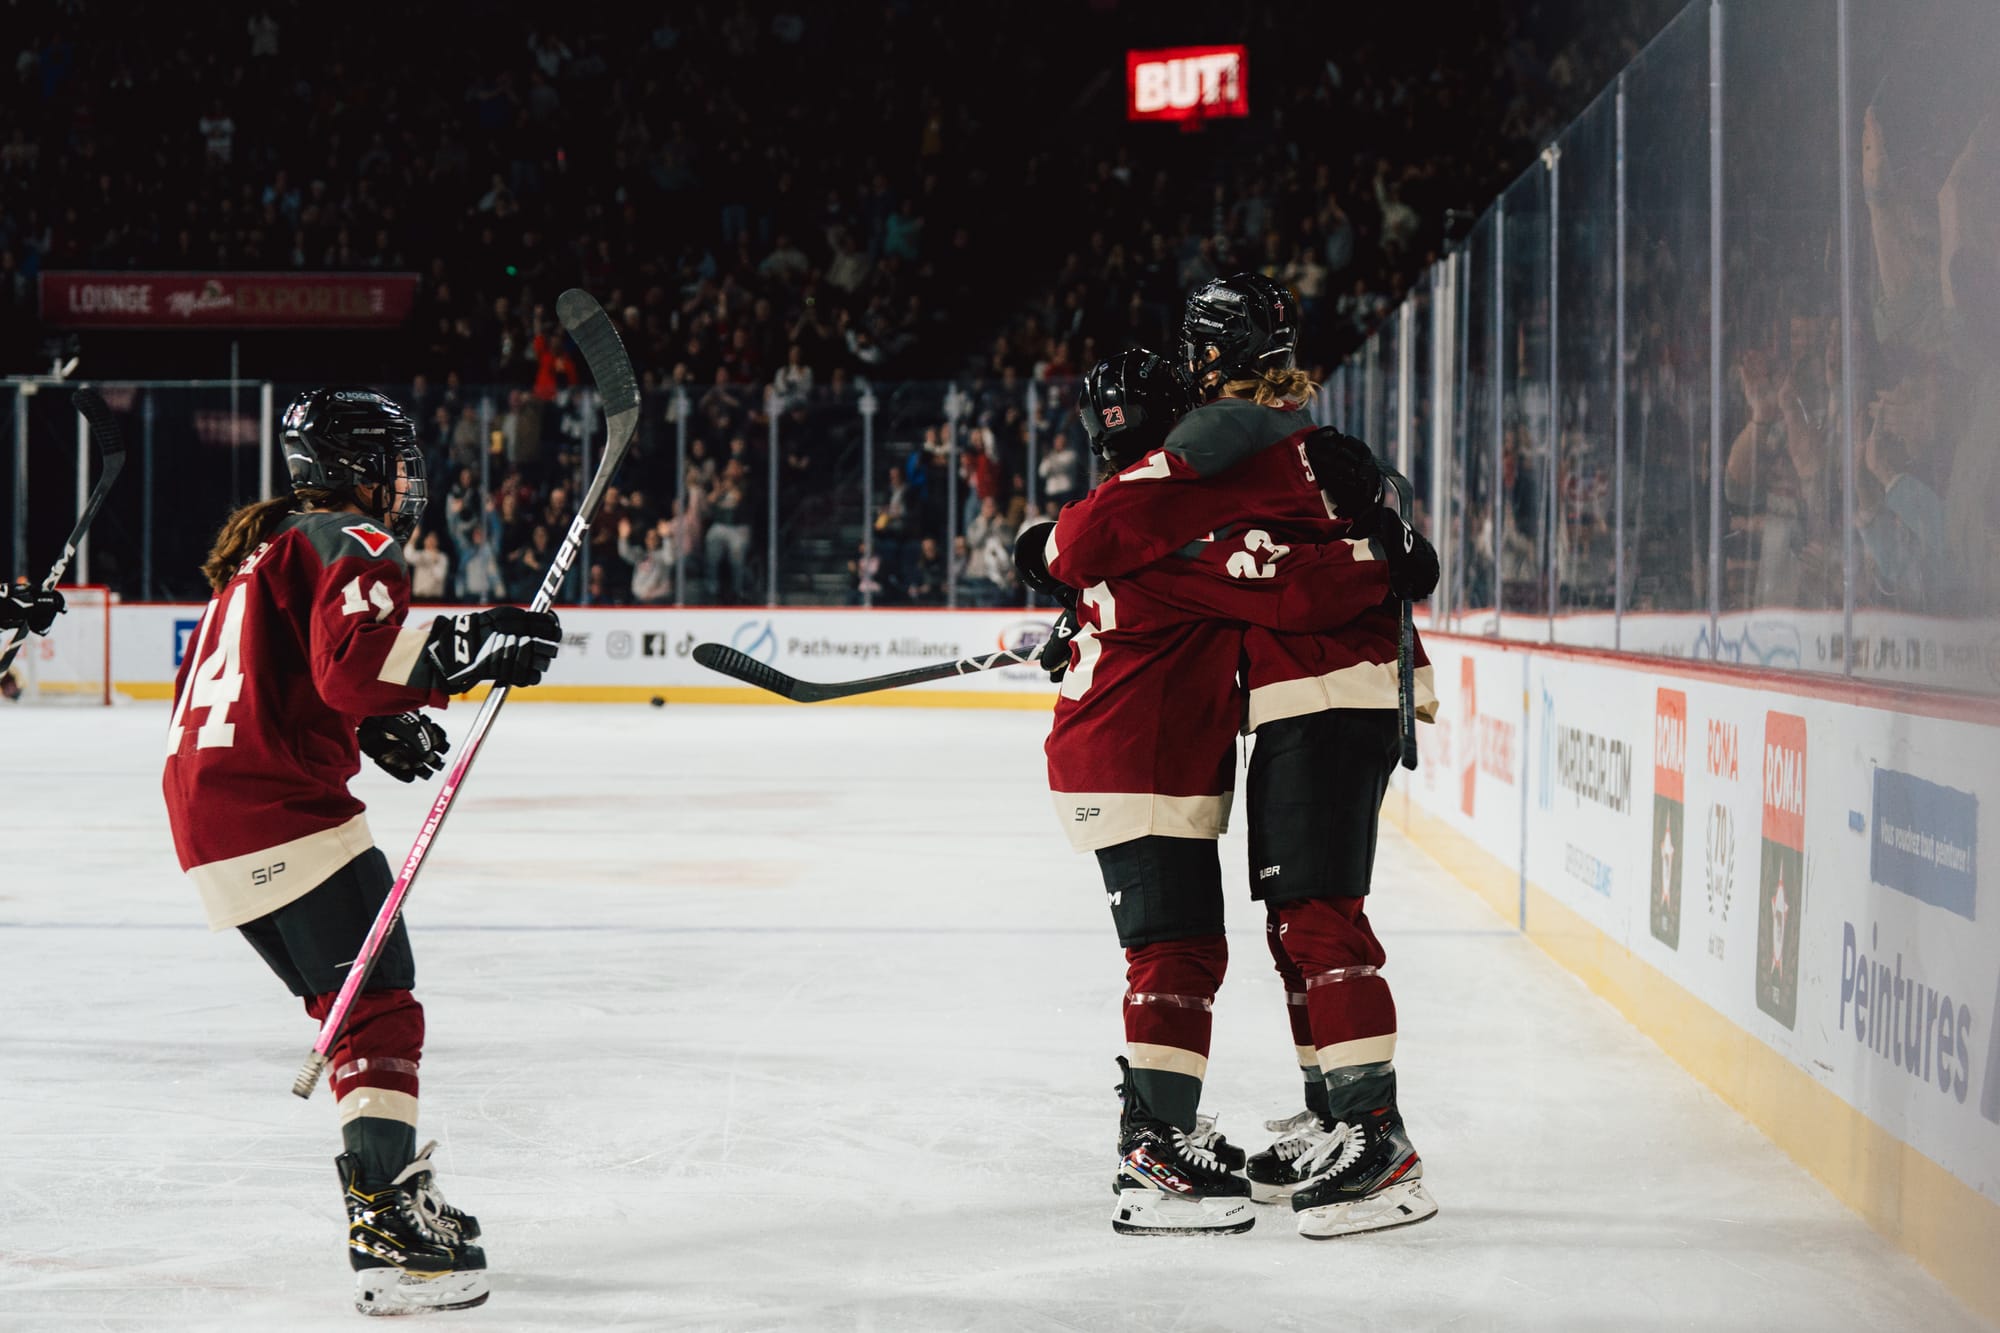 Laure Stacey celebrates her goal against Ottawa with her teammates, all wearing their maroon home uniforms..